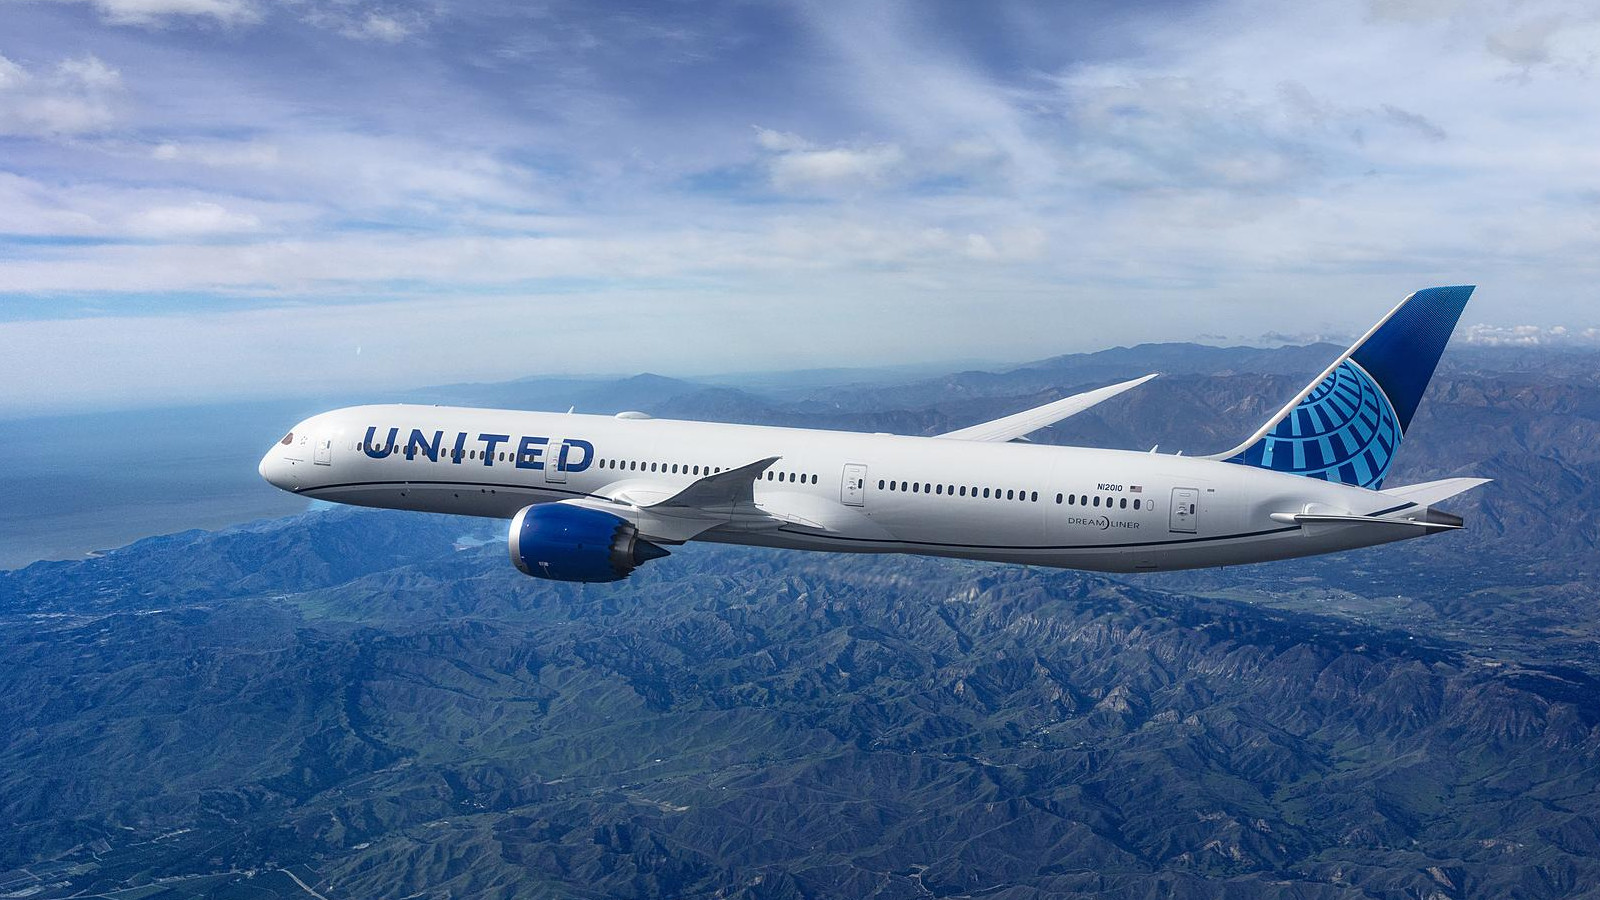 United offering Europe flights from 30,000 miles one-way - The